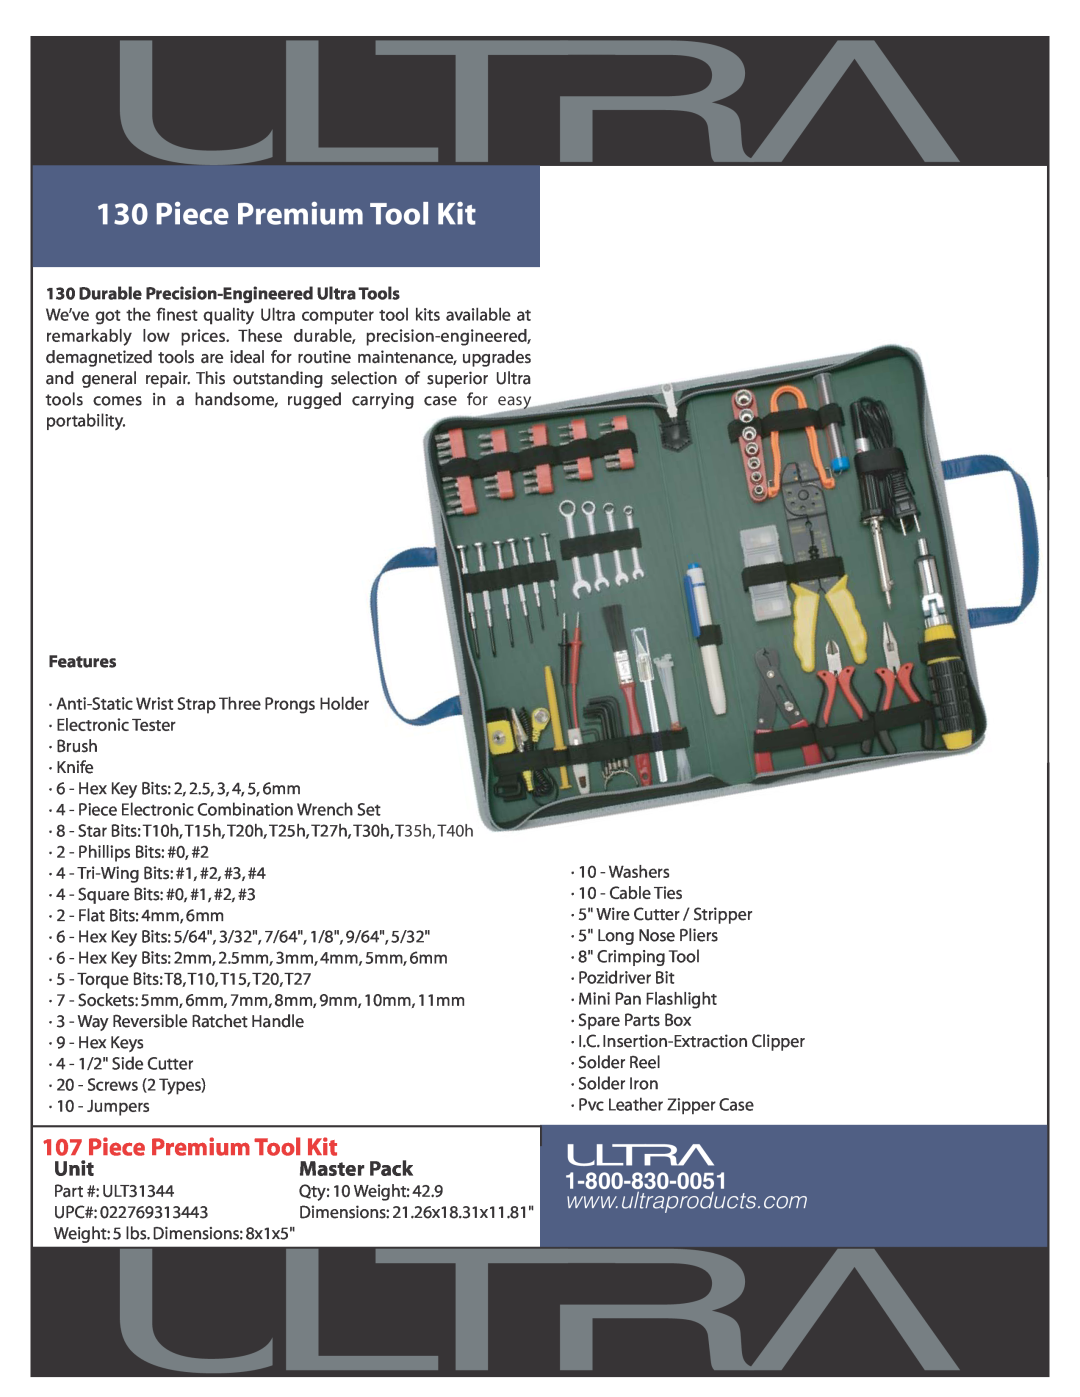 Ultra Products ULT31344 dimensions Piece Premium Tool Kit, Unit, Master Pack, Durable Precision-Engineered Ultra Tools 